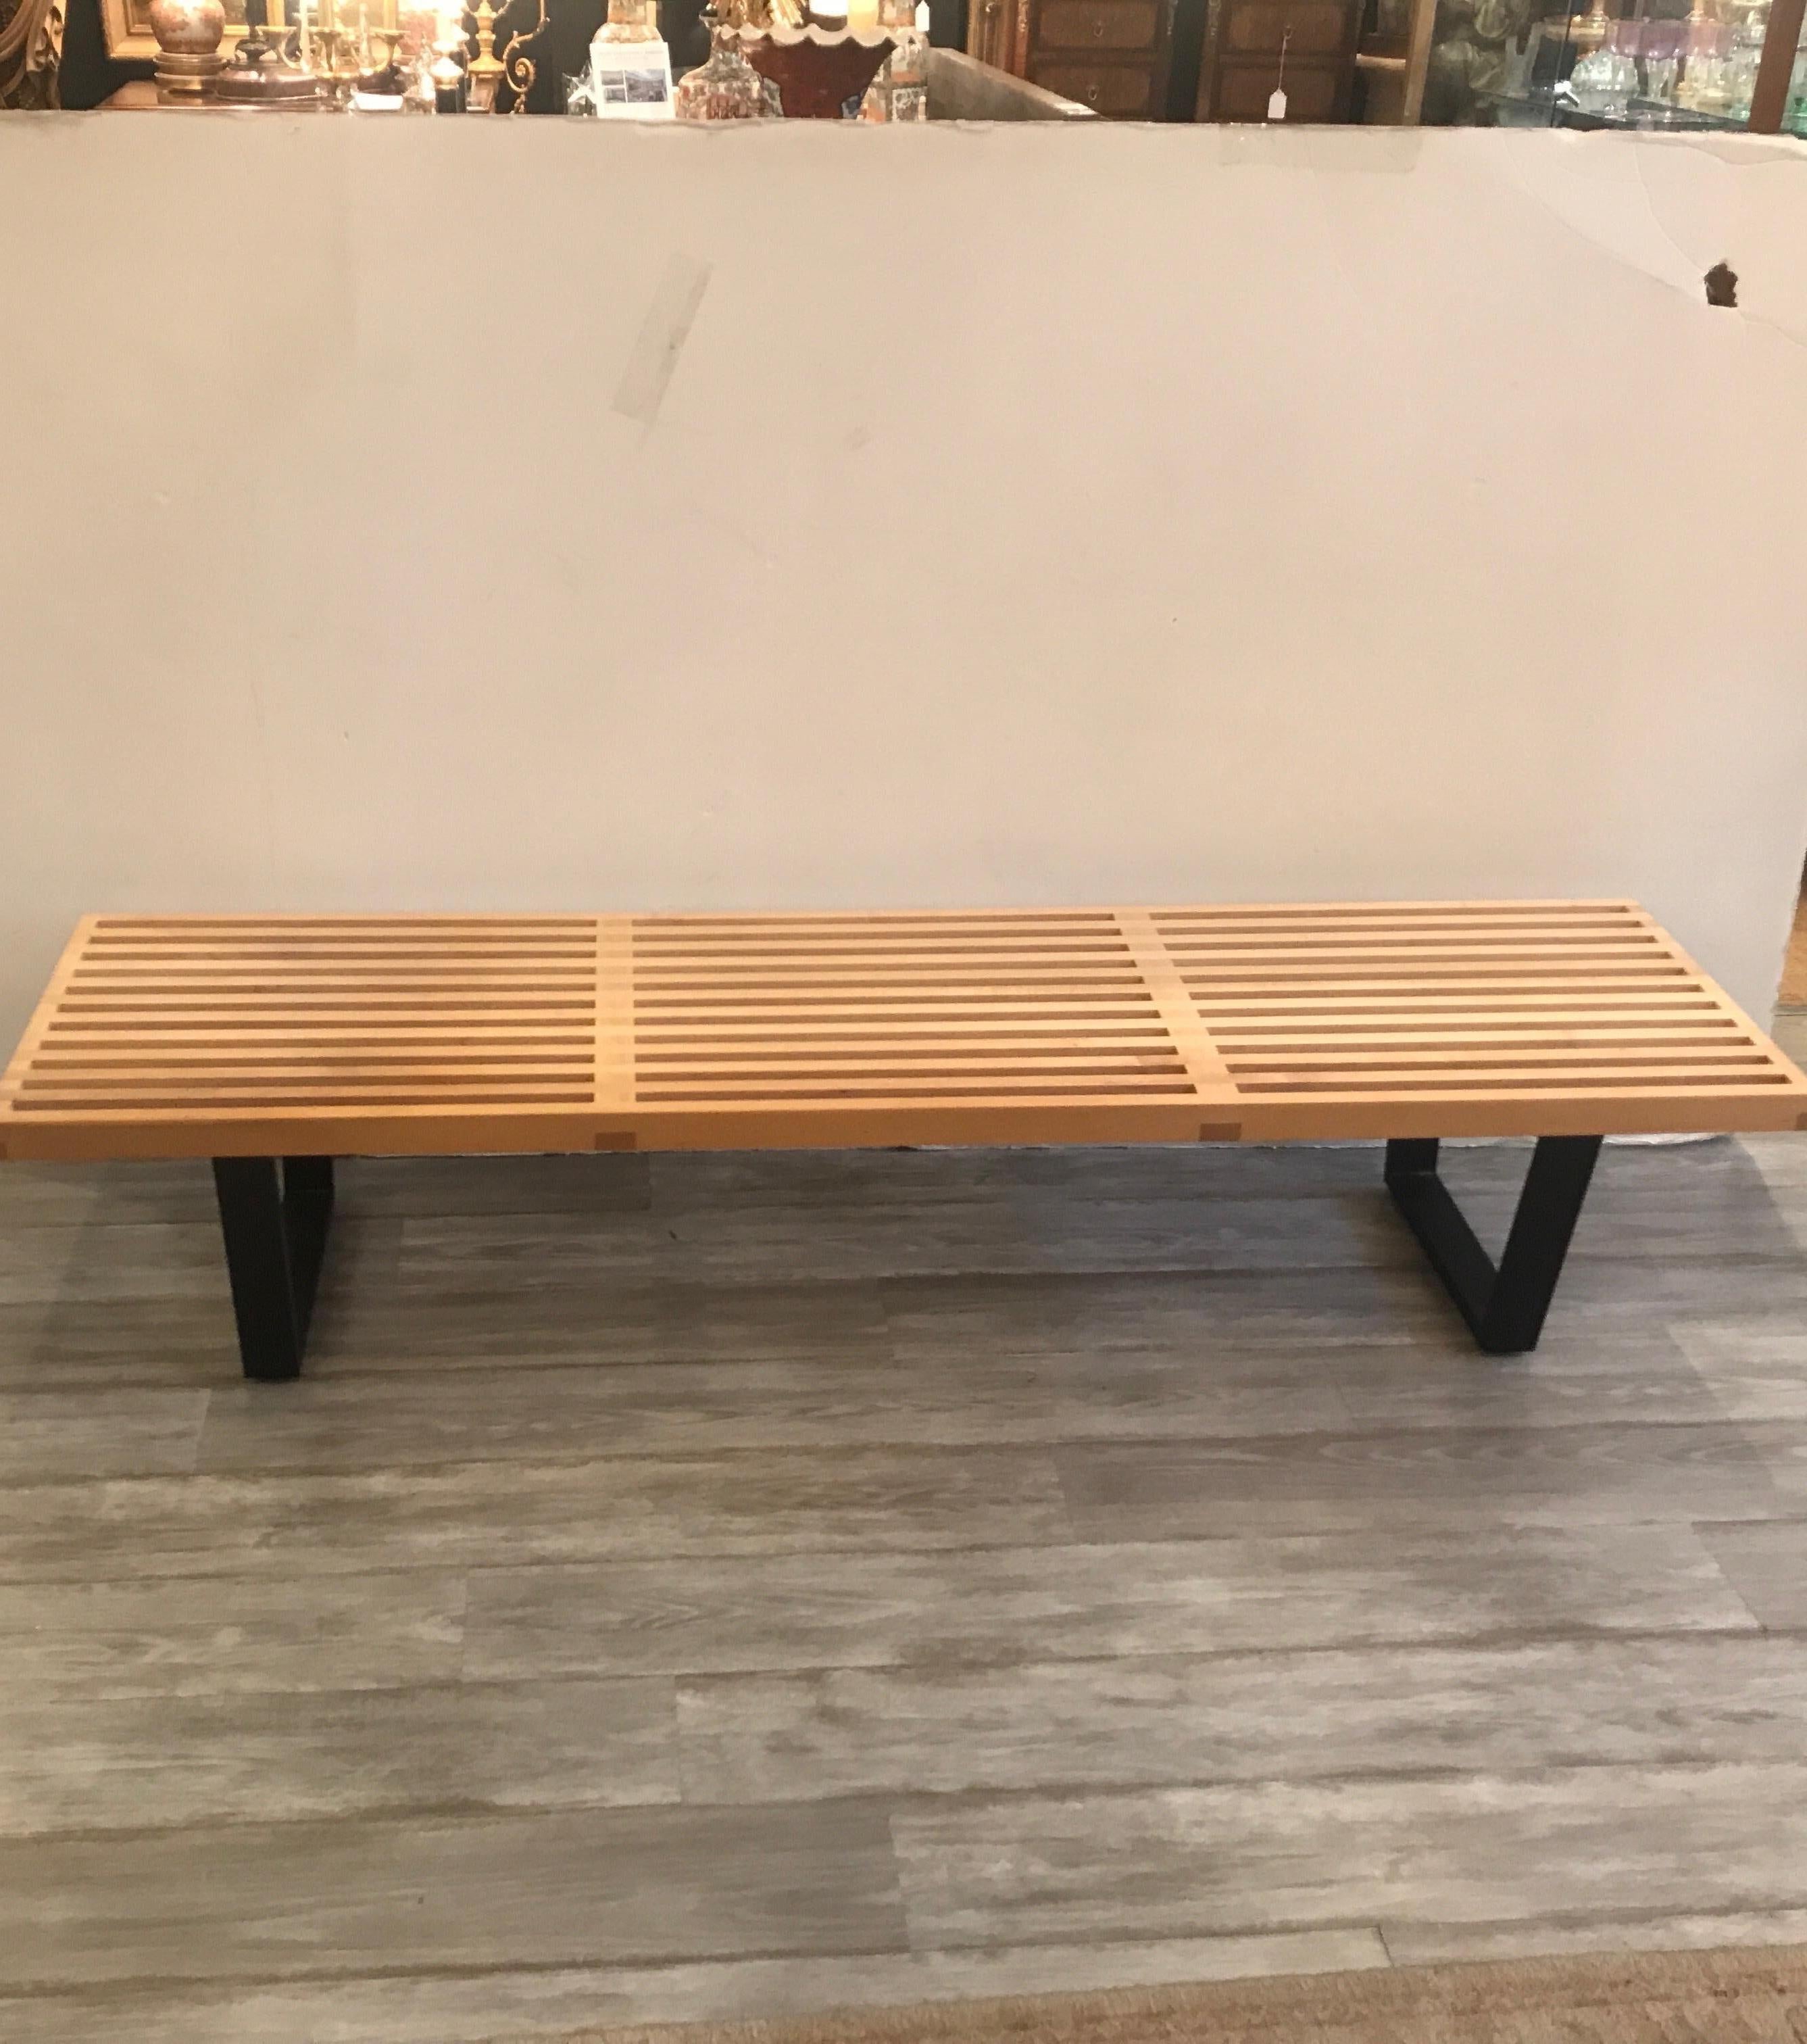 Iconic clean lined modern bench, designed by George Nelson for Herman Miller. This slat bench is constructed from natural solid maple and black lacquered wood base. Made in 2004.